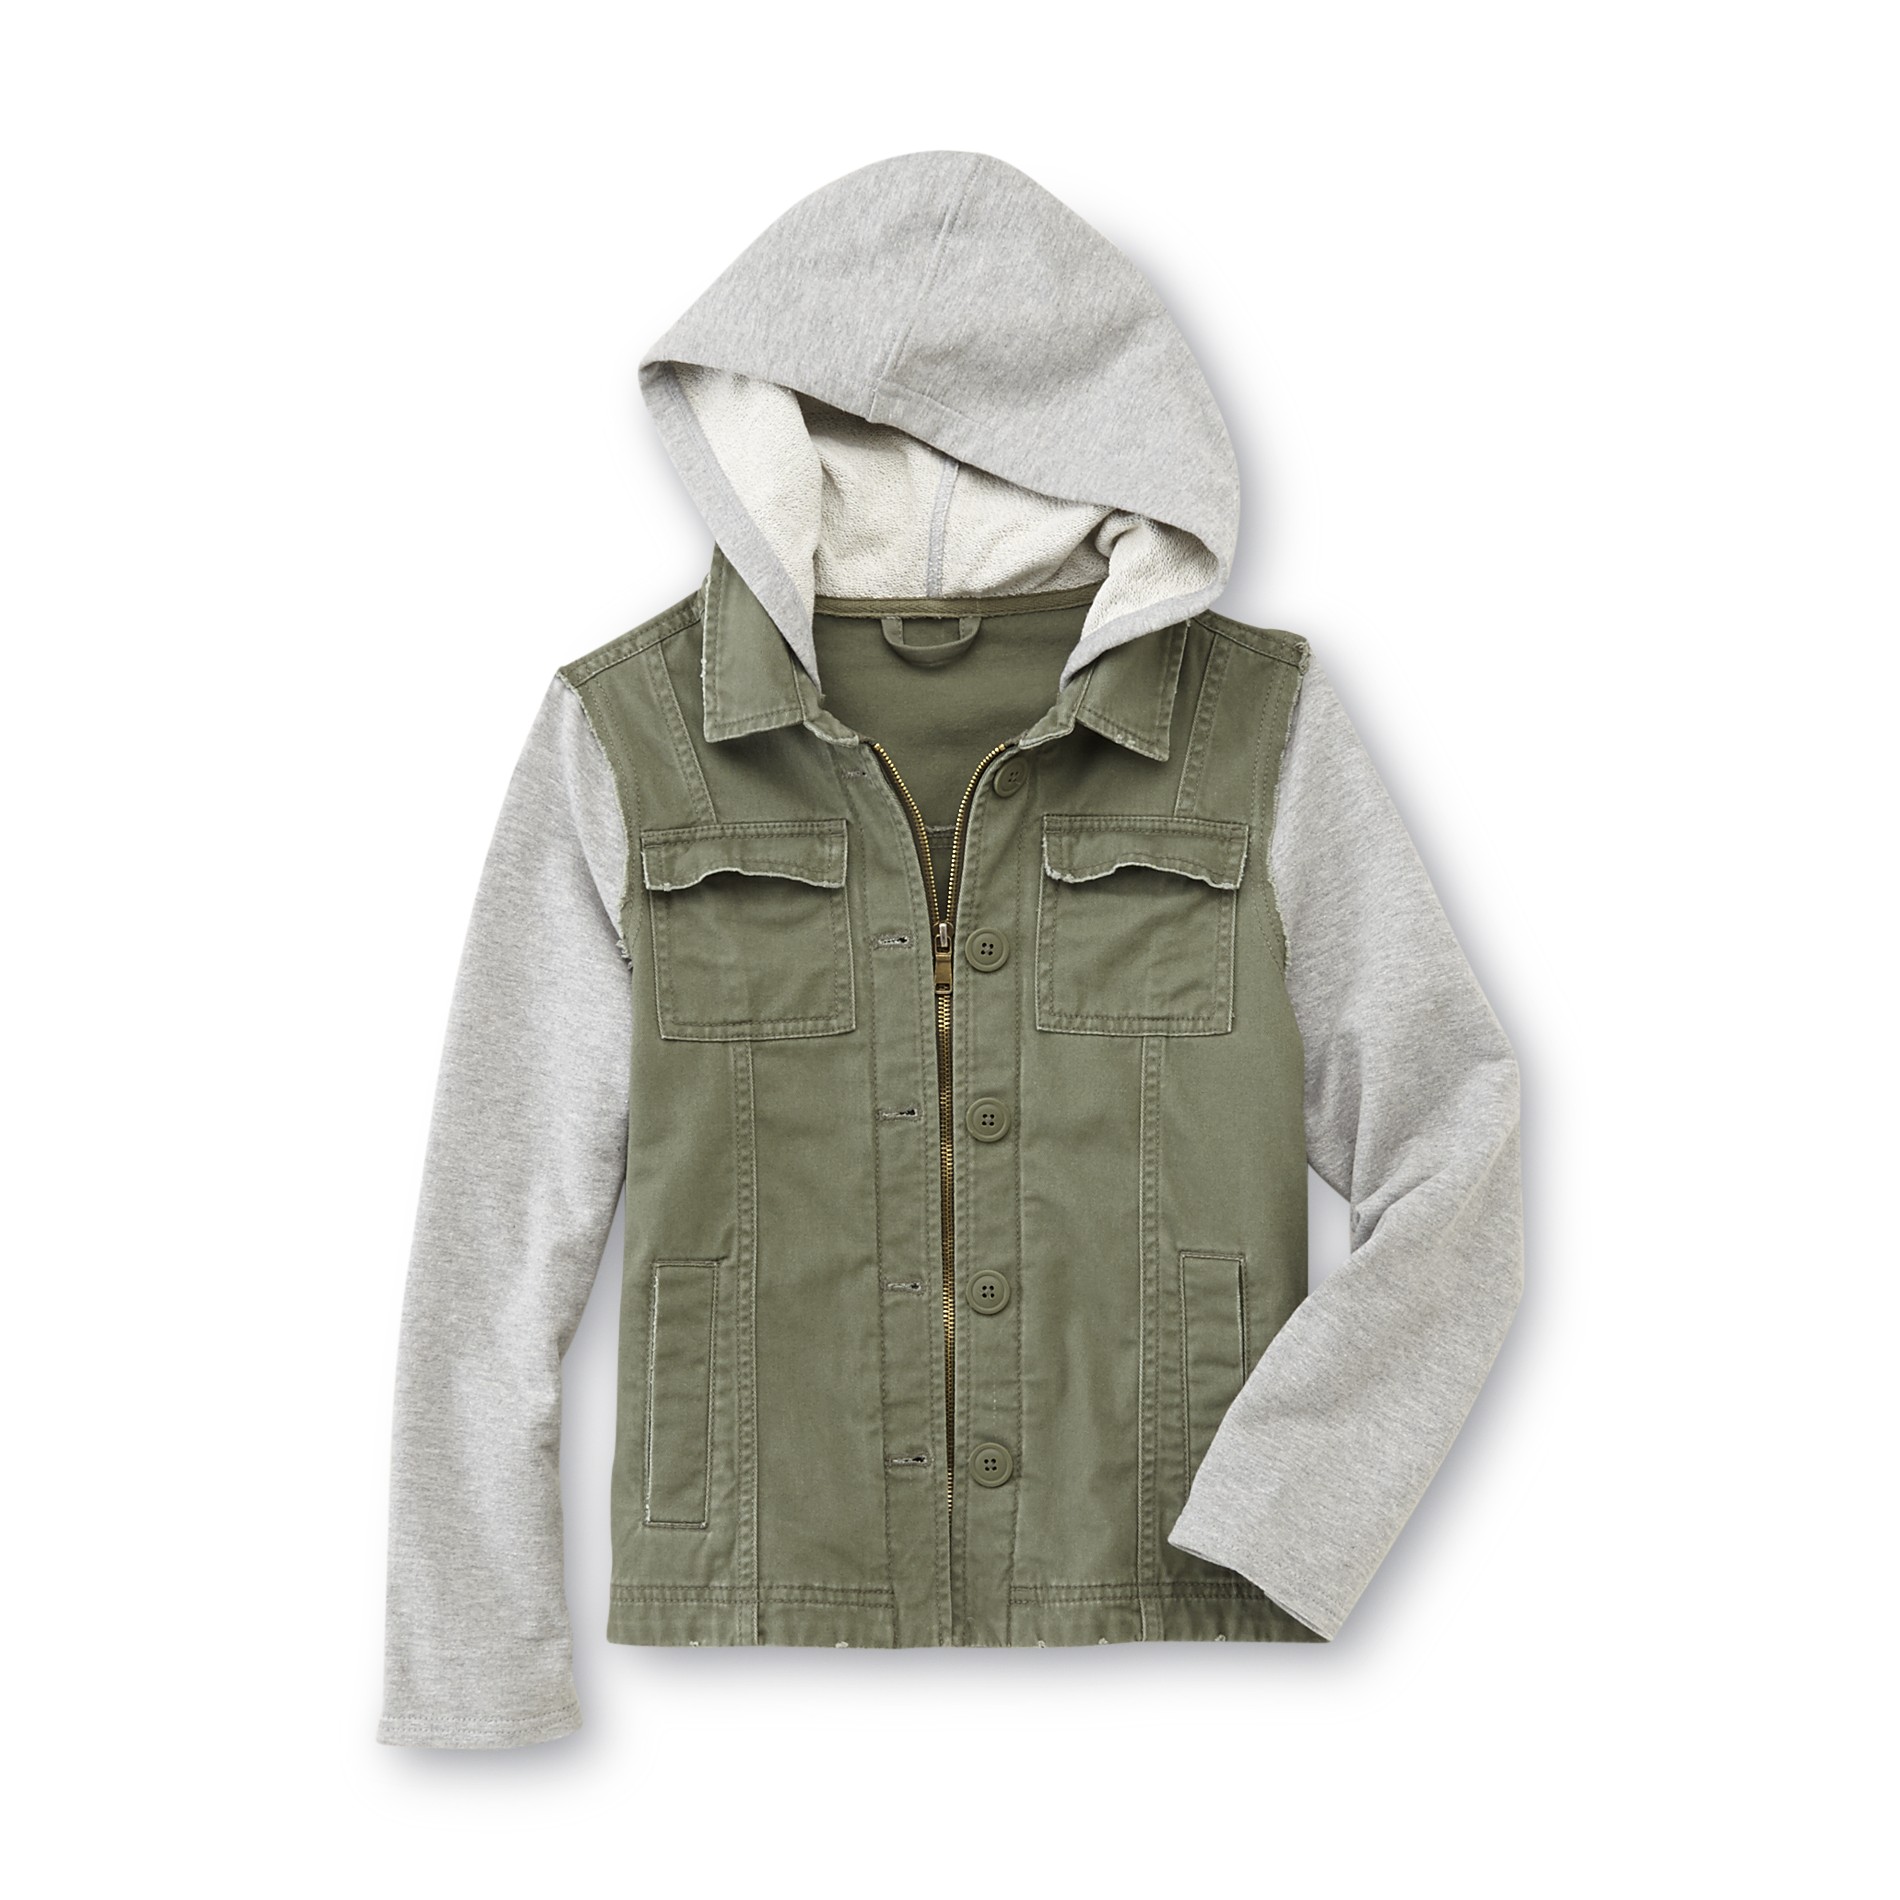 Canyon River Blues Girl's Layered-Look Military Hoodie Jacket